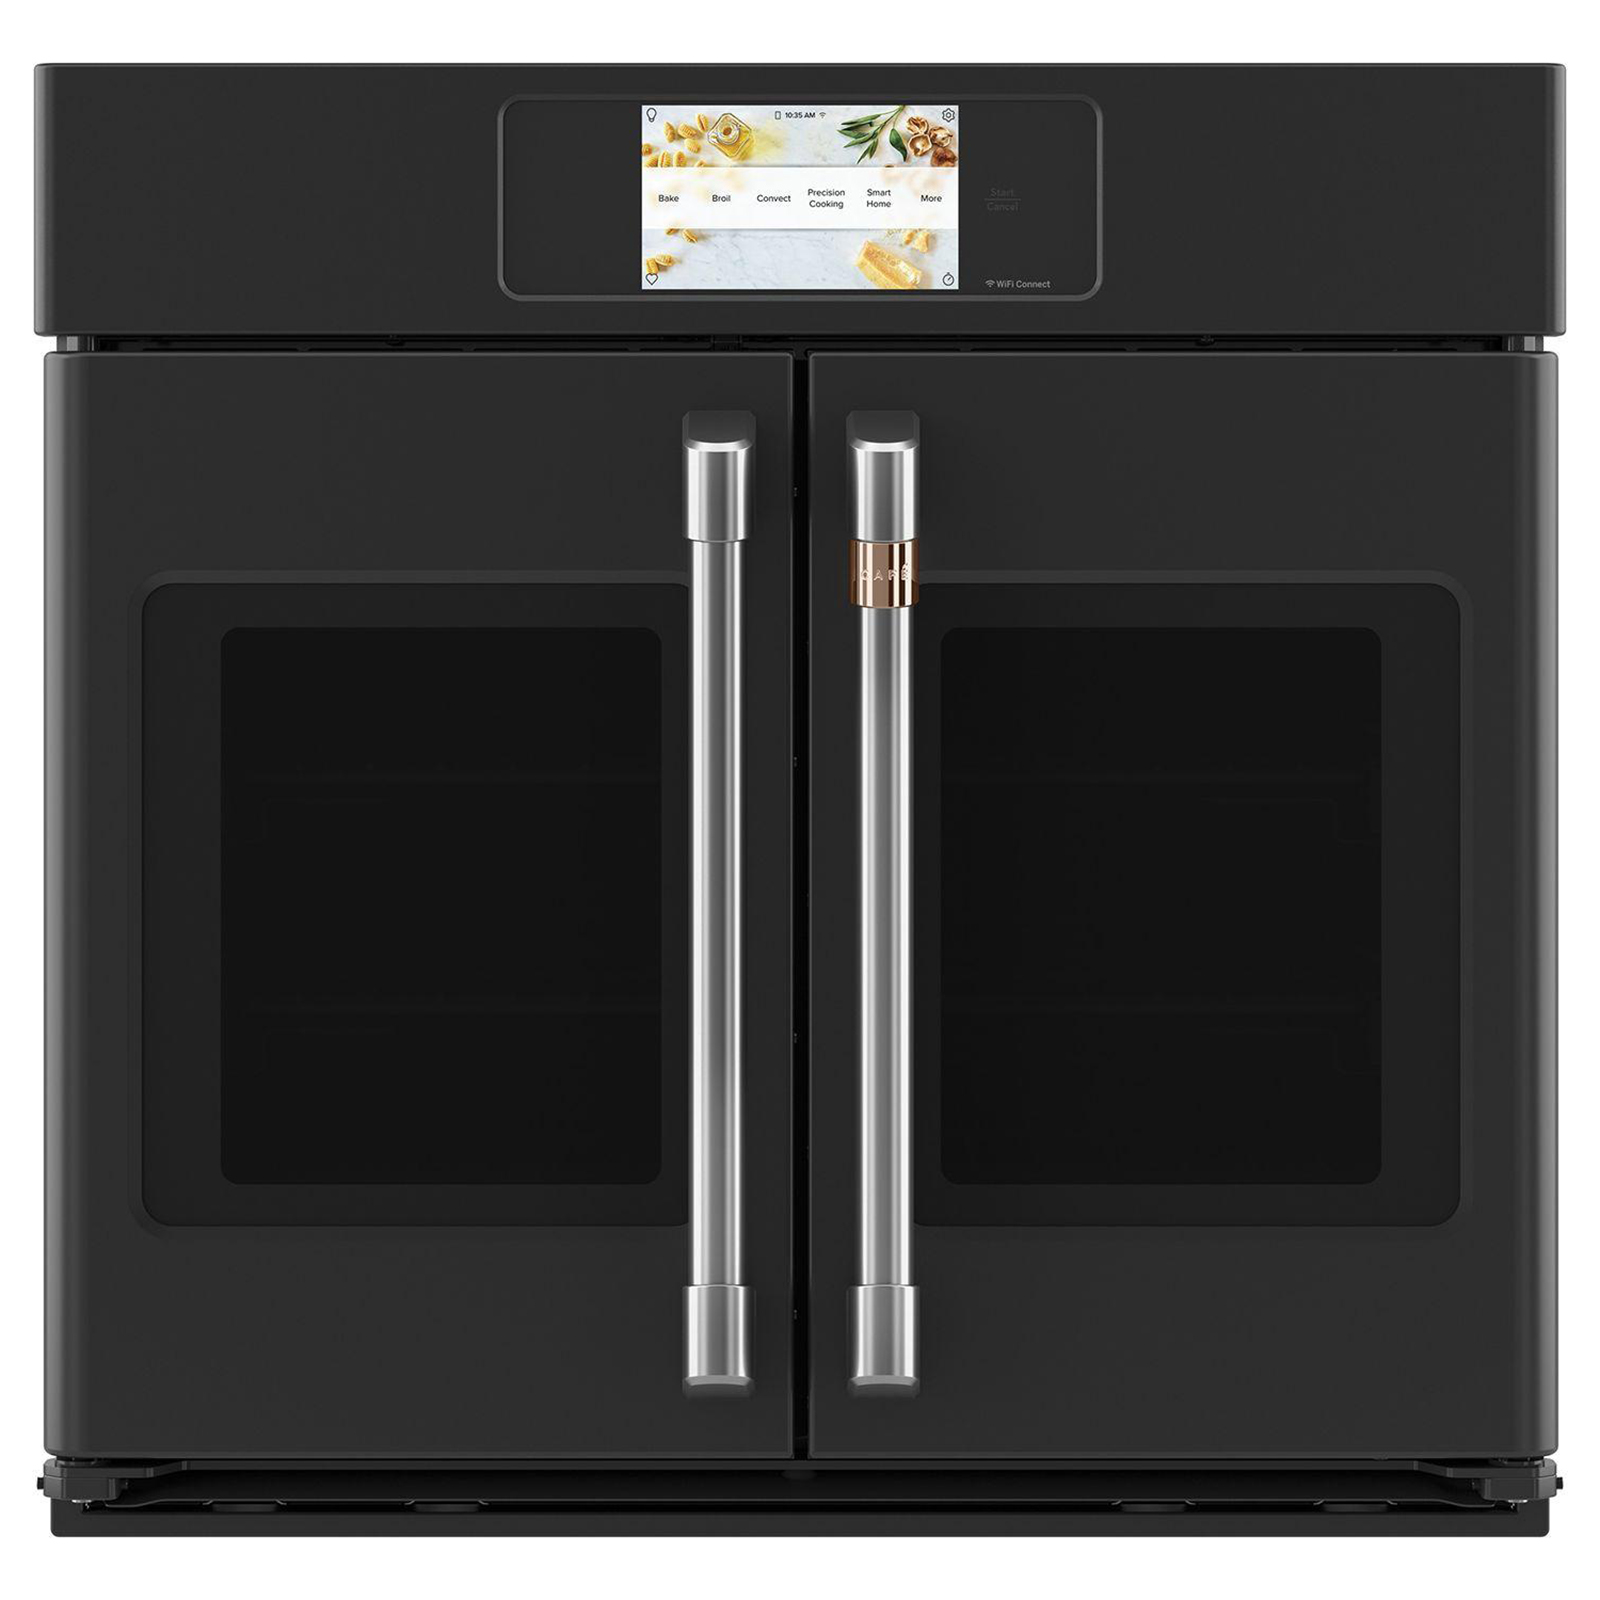 CAFE CTS90FP3ND1 30" Professional Smart Built-In Convection Single Wall Oven